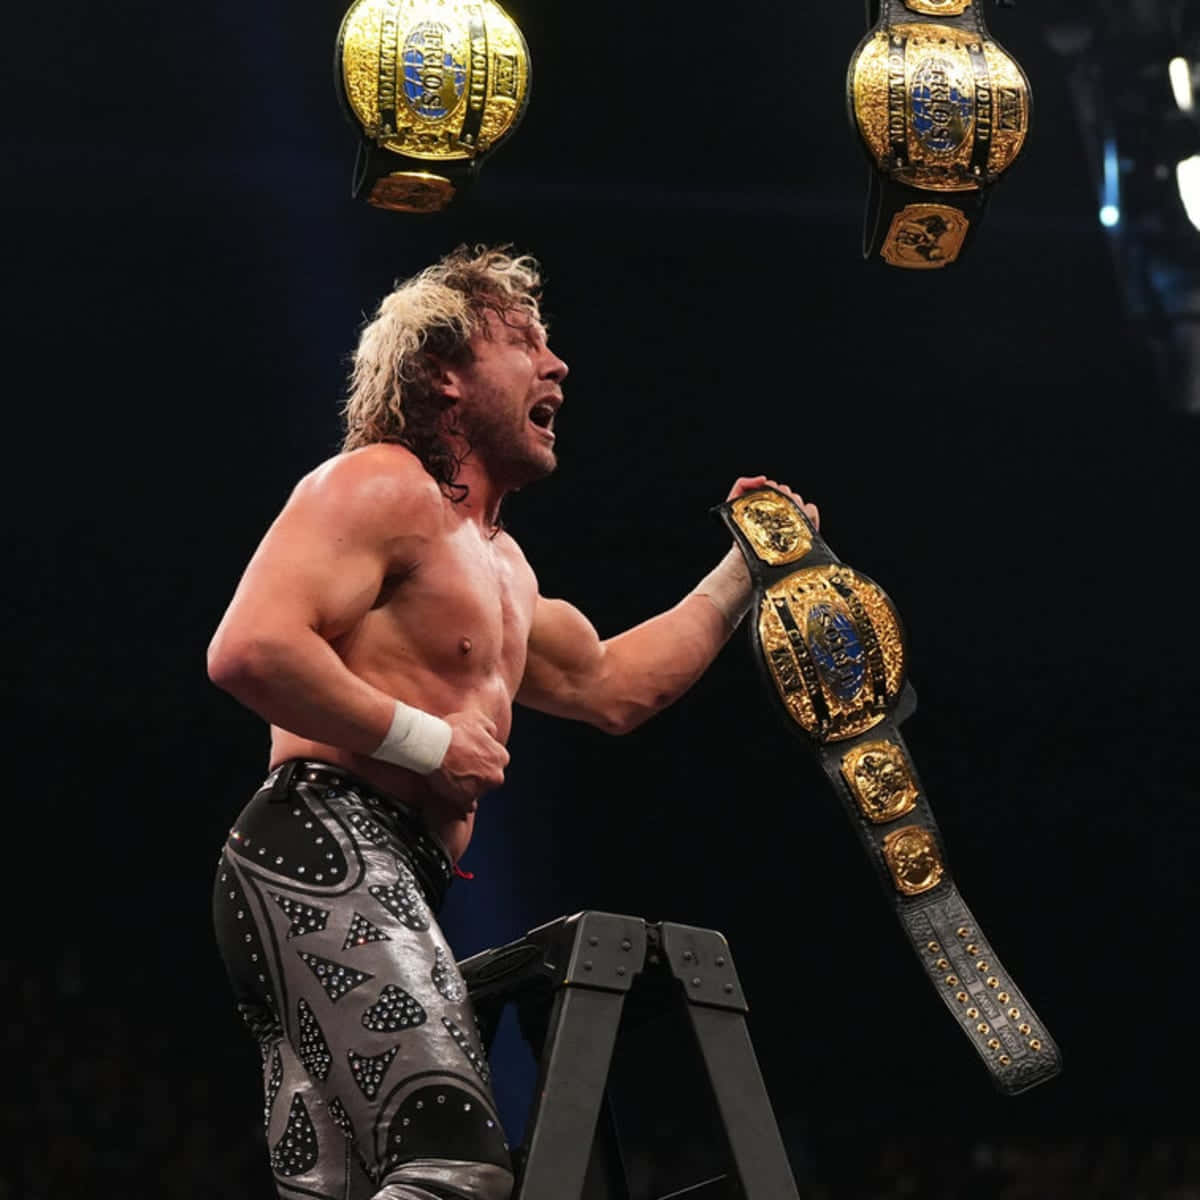 Kenny Omega Aew Trios World Championship Belt Picture